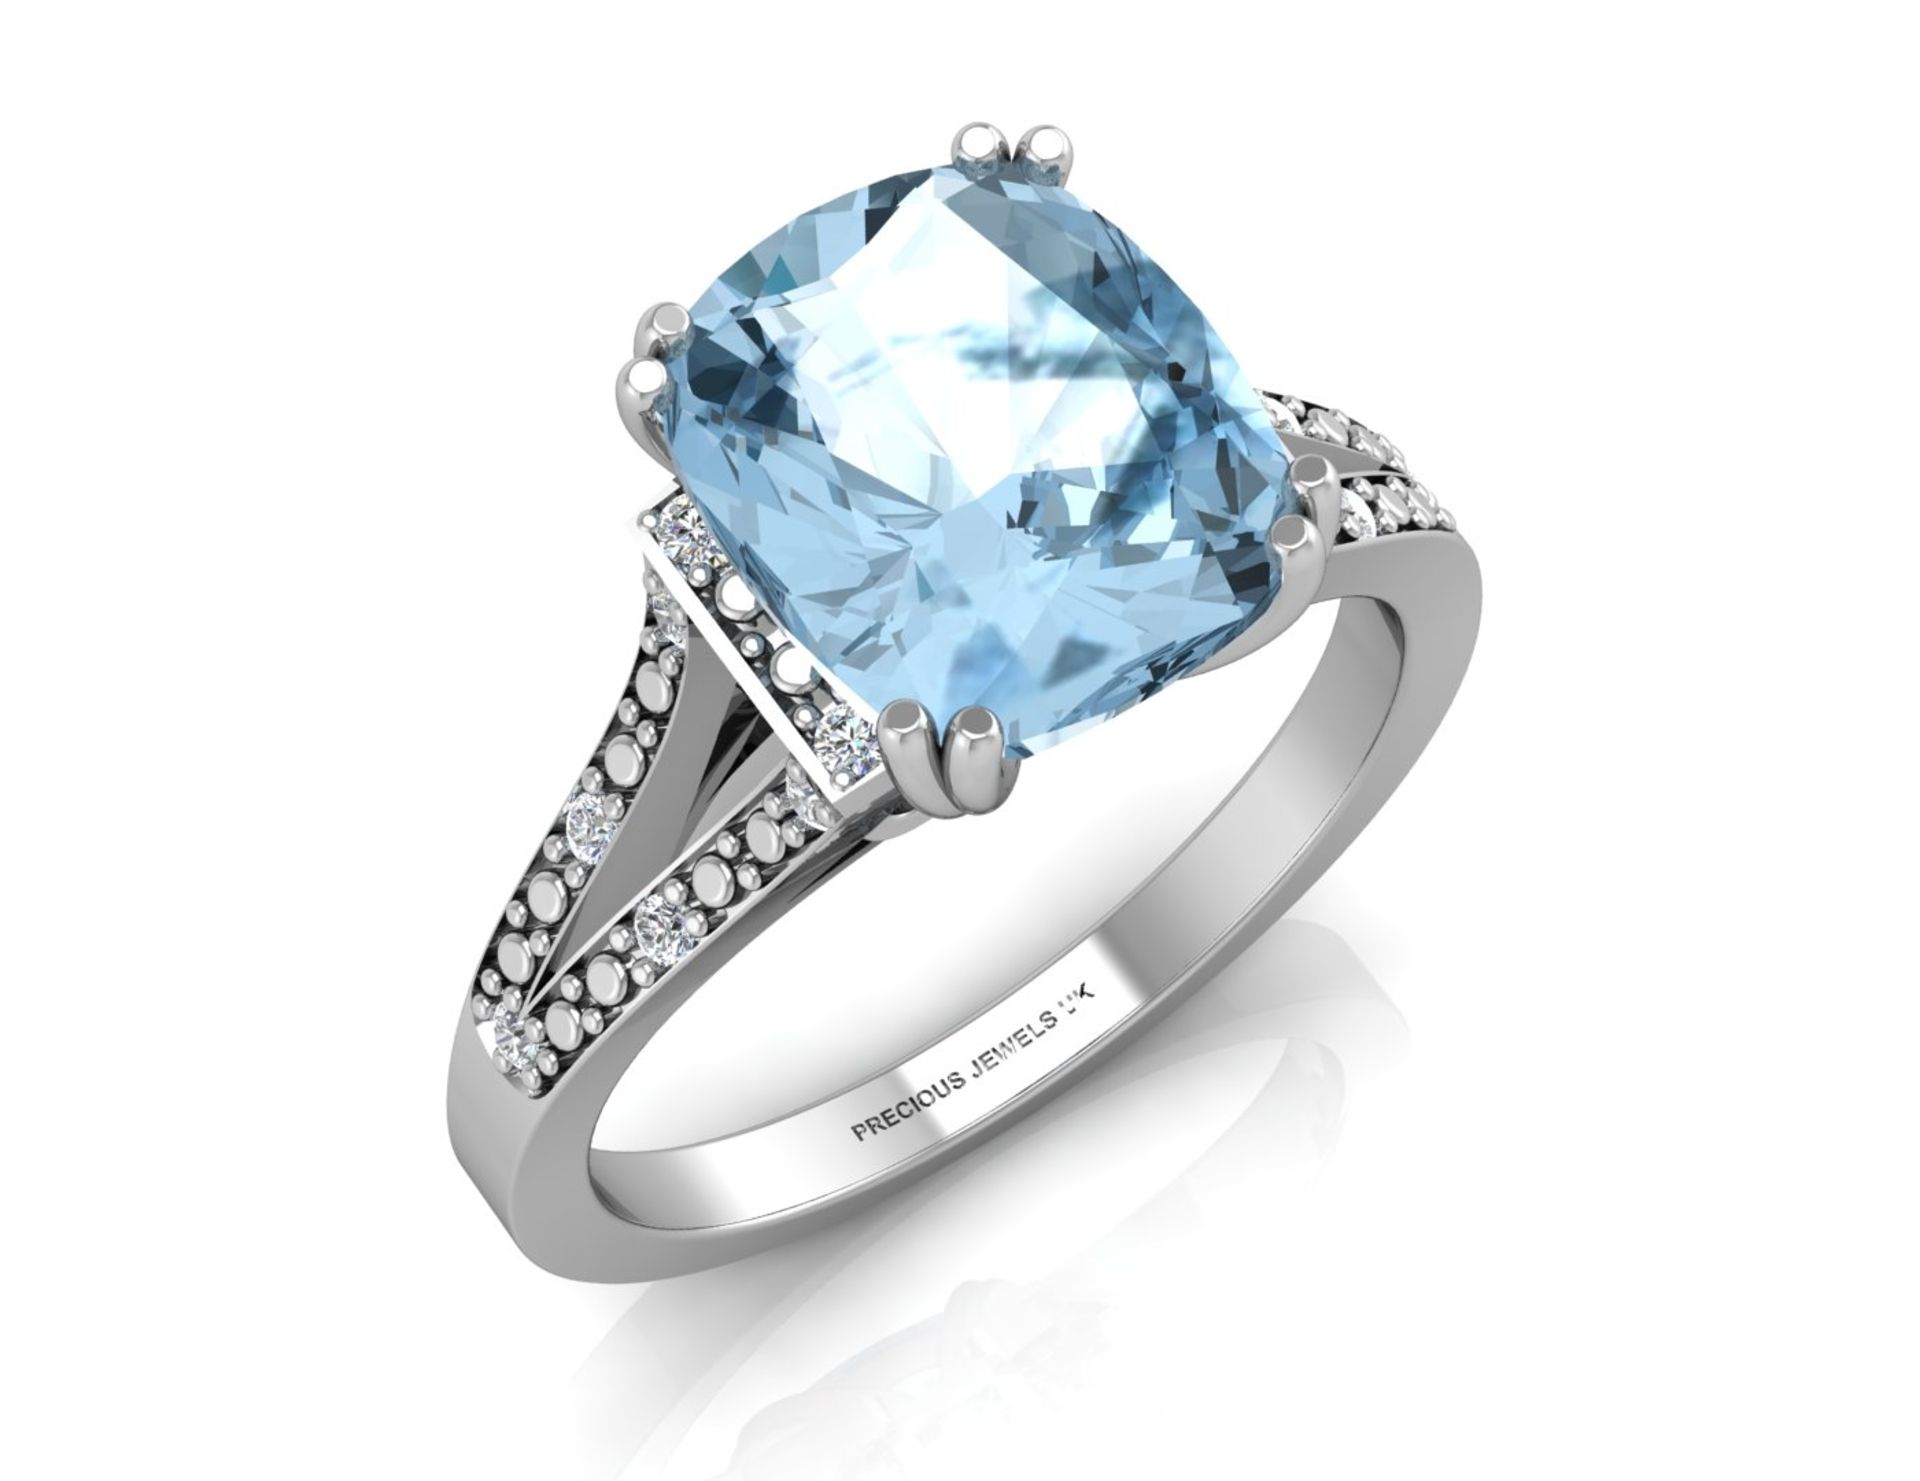 9ct White Gold Diamond And Blue Topaz Ring 0.07 Carats - Valued by AGI £1,250.00 - This stunning